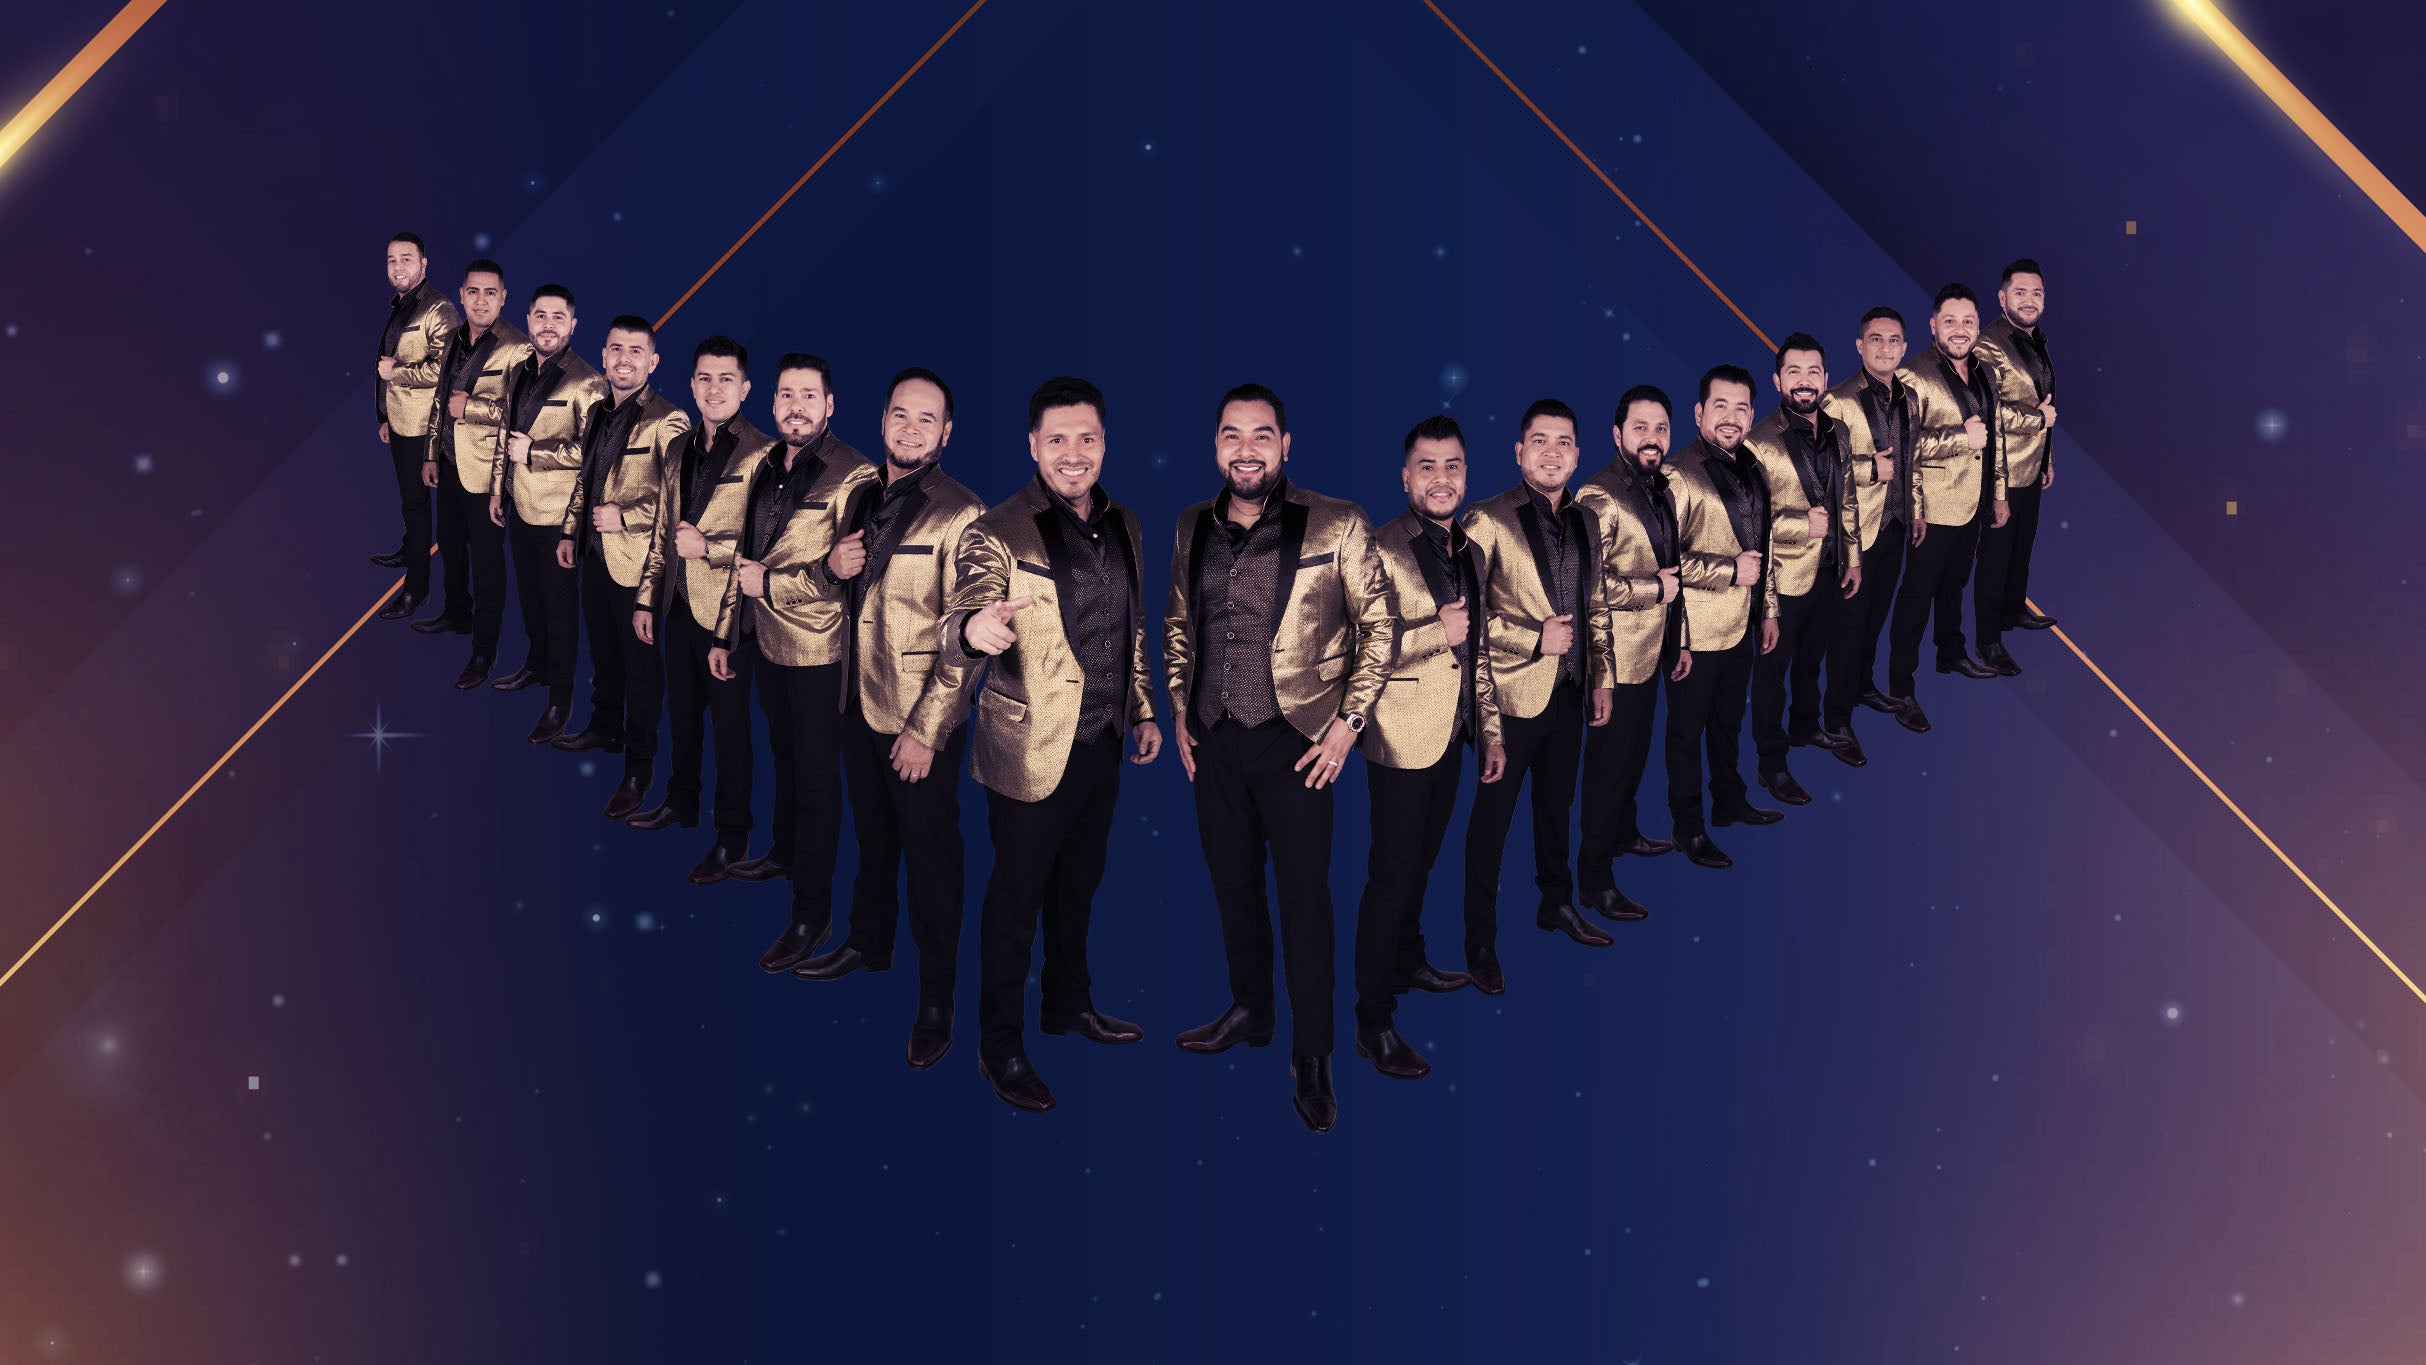 exclusive presale password for Banda MS affordable tickets in Las Vegas at Michelob Ultra Arena